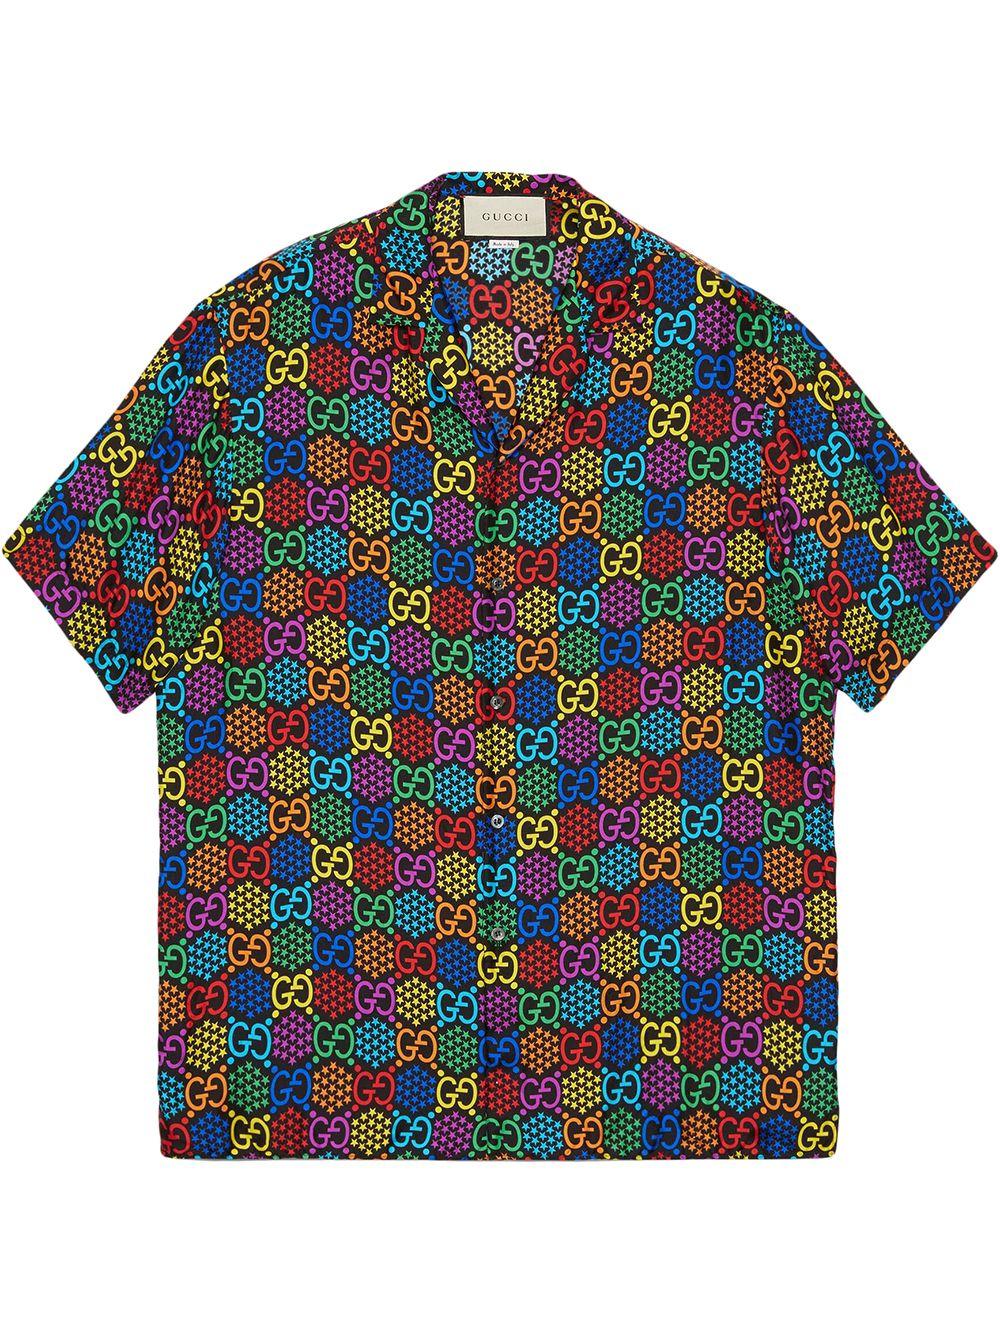 Gucci GG Psychedelic Print Bowling Shirt in Blue for Men